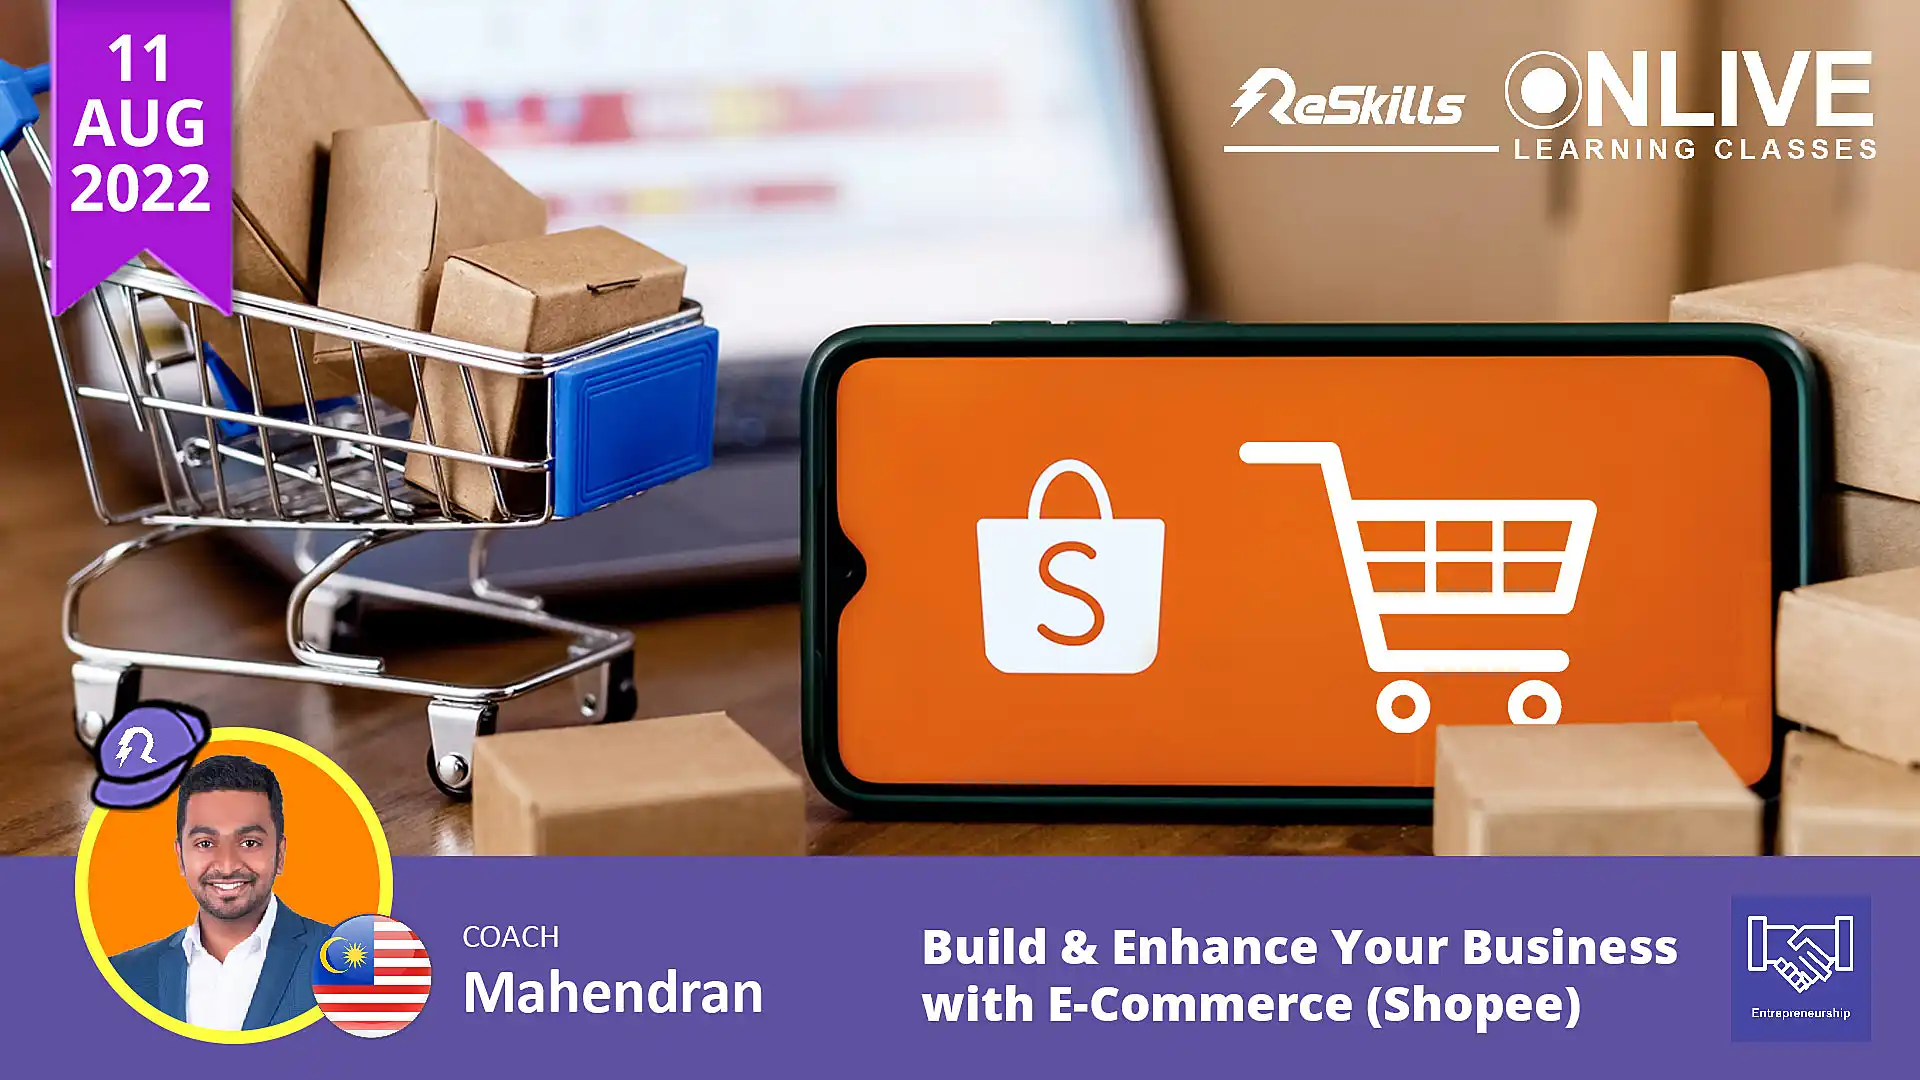 Build & Enhance Your Business with E-Commerce (Shopee) - ReSkills